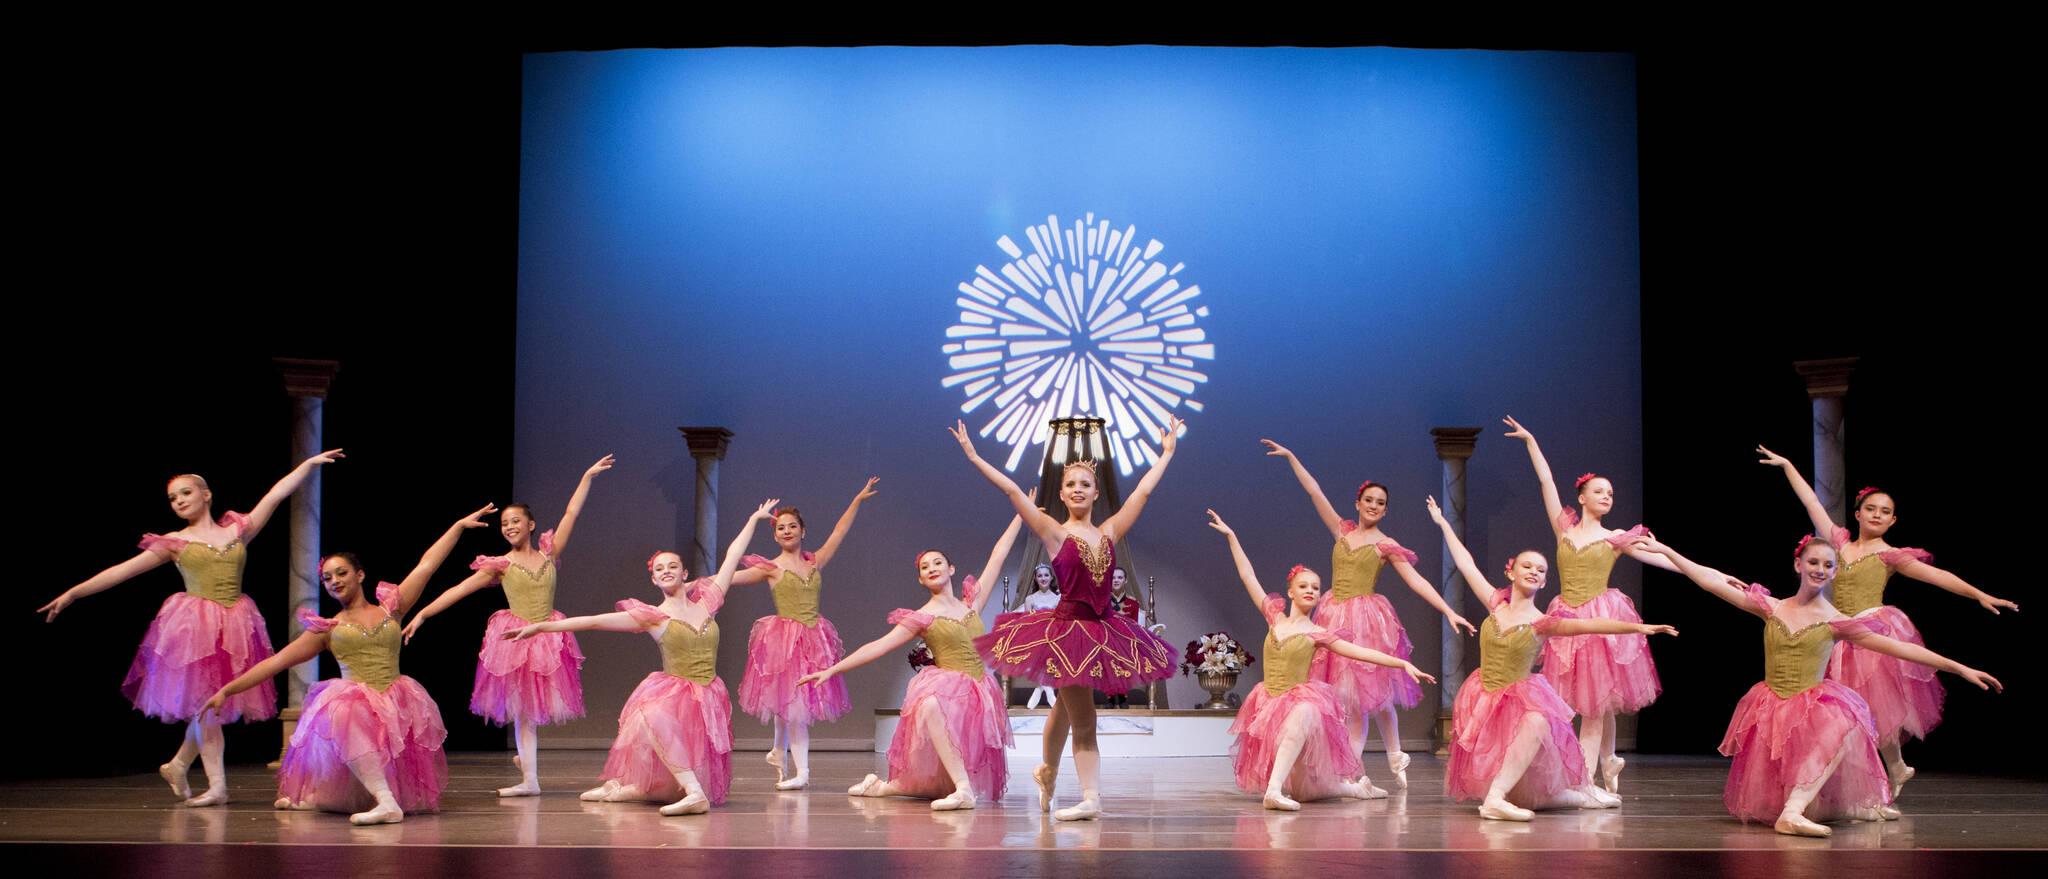 Evergreen City Ballet has supported young dancers and instilled a love for ballet in the Renton community for 28 years. Photography by Michelle Smith-Lewis